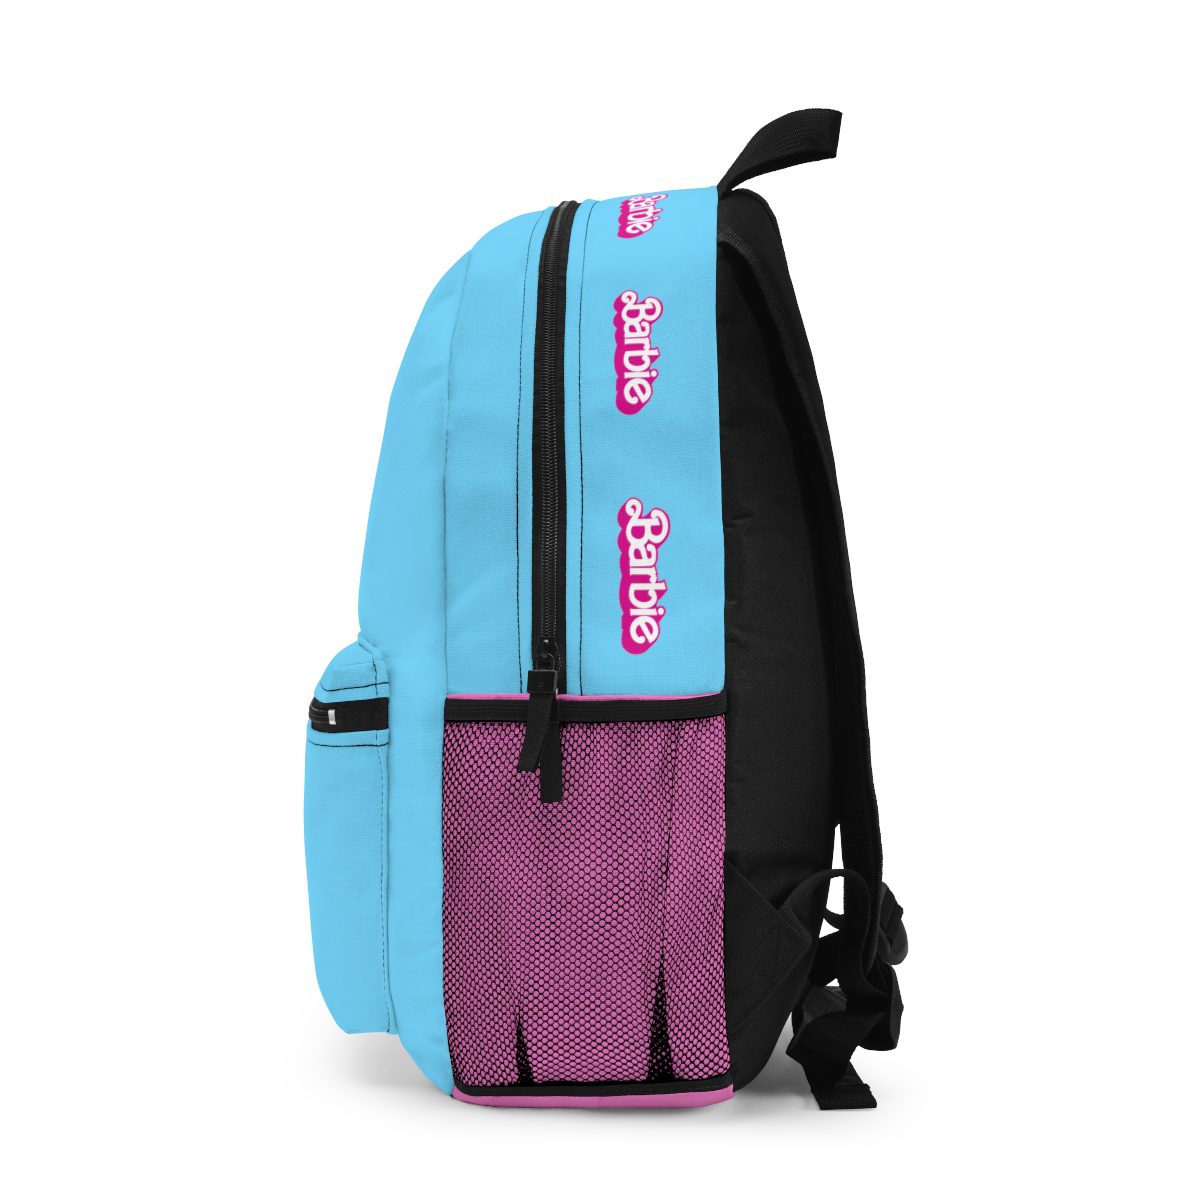 Sky Blue and Pink Barbie Backpack with Circular Logo Cool Kiddo 14